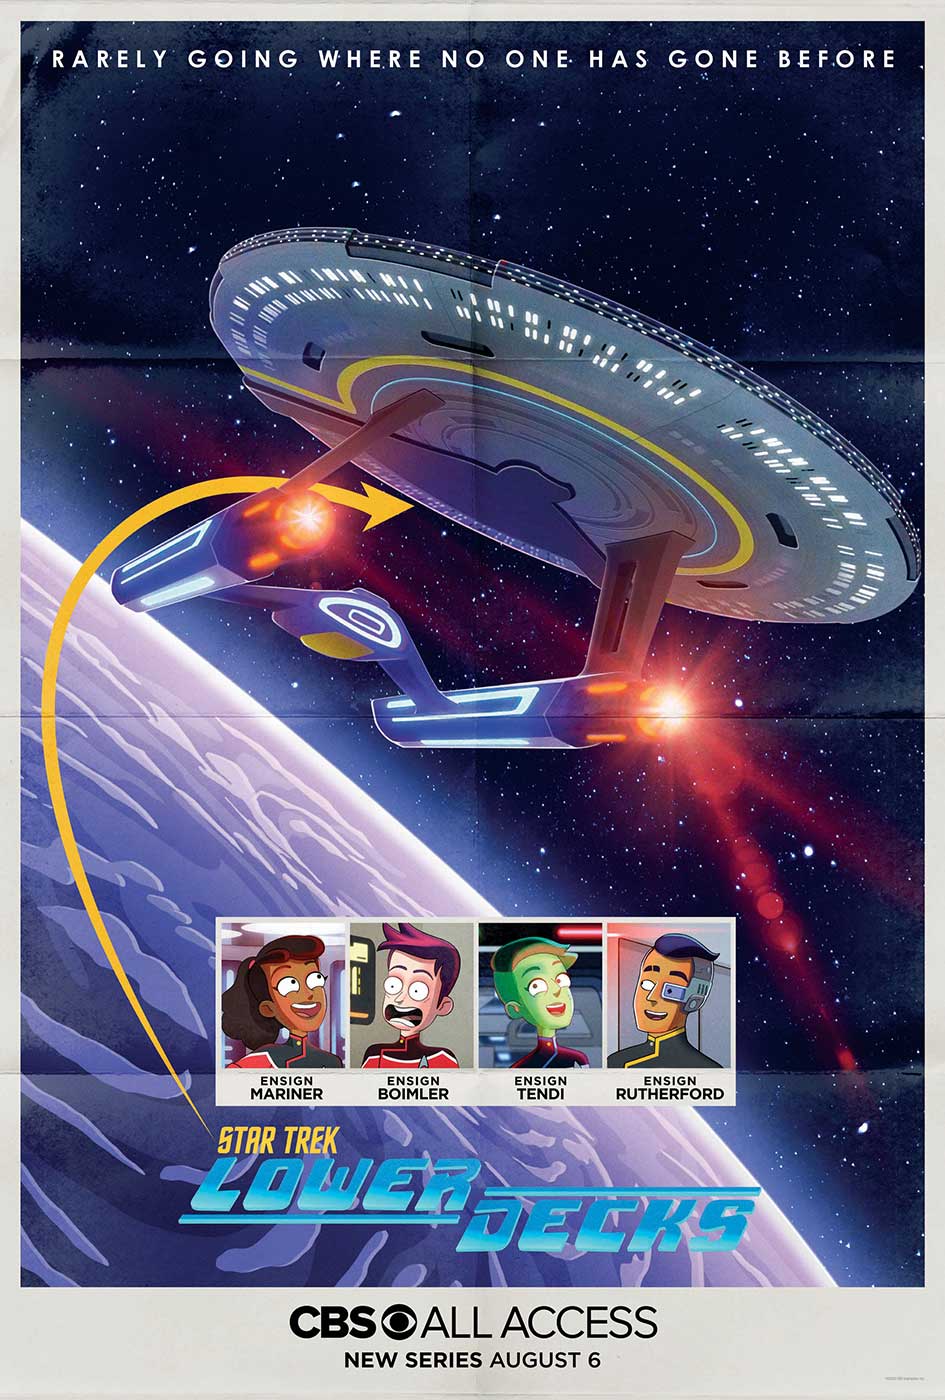 Star Trek: Lower Decks Animated Series Release Date and New Image Revealed